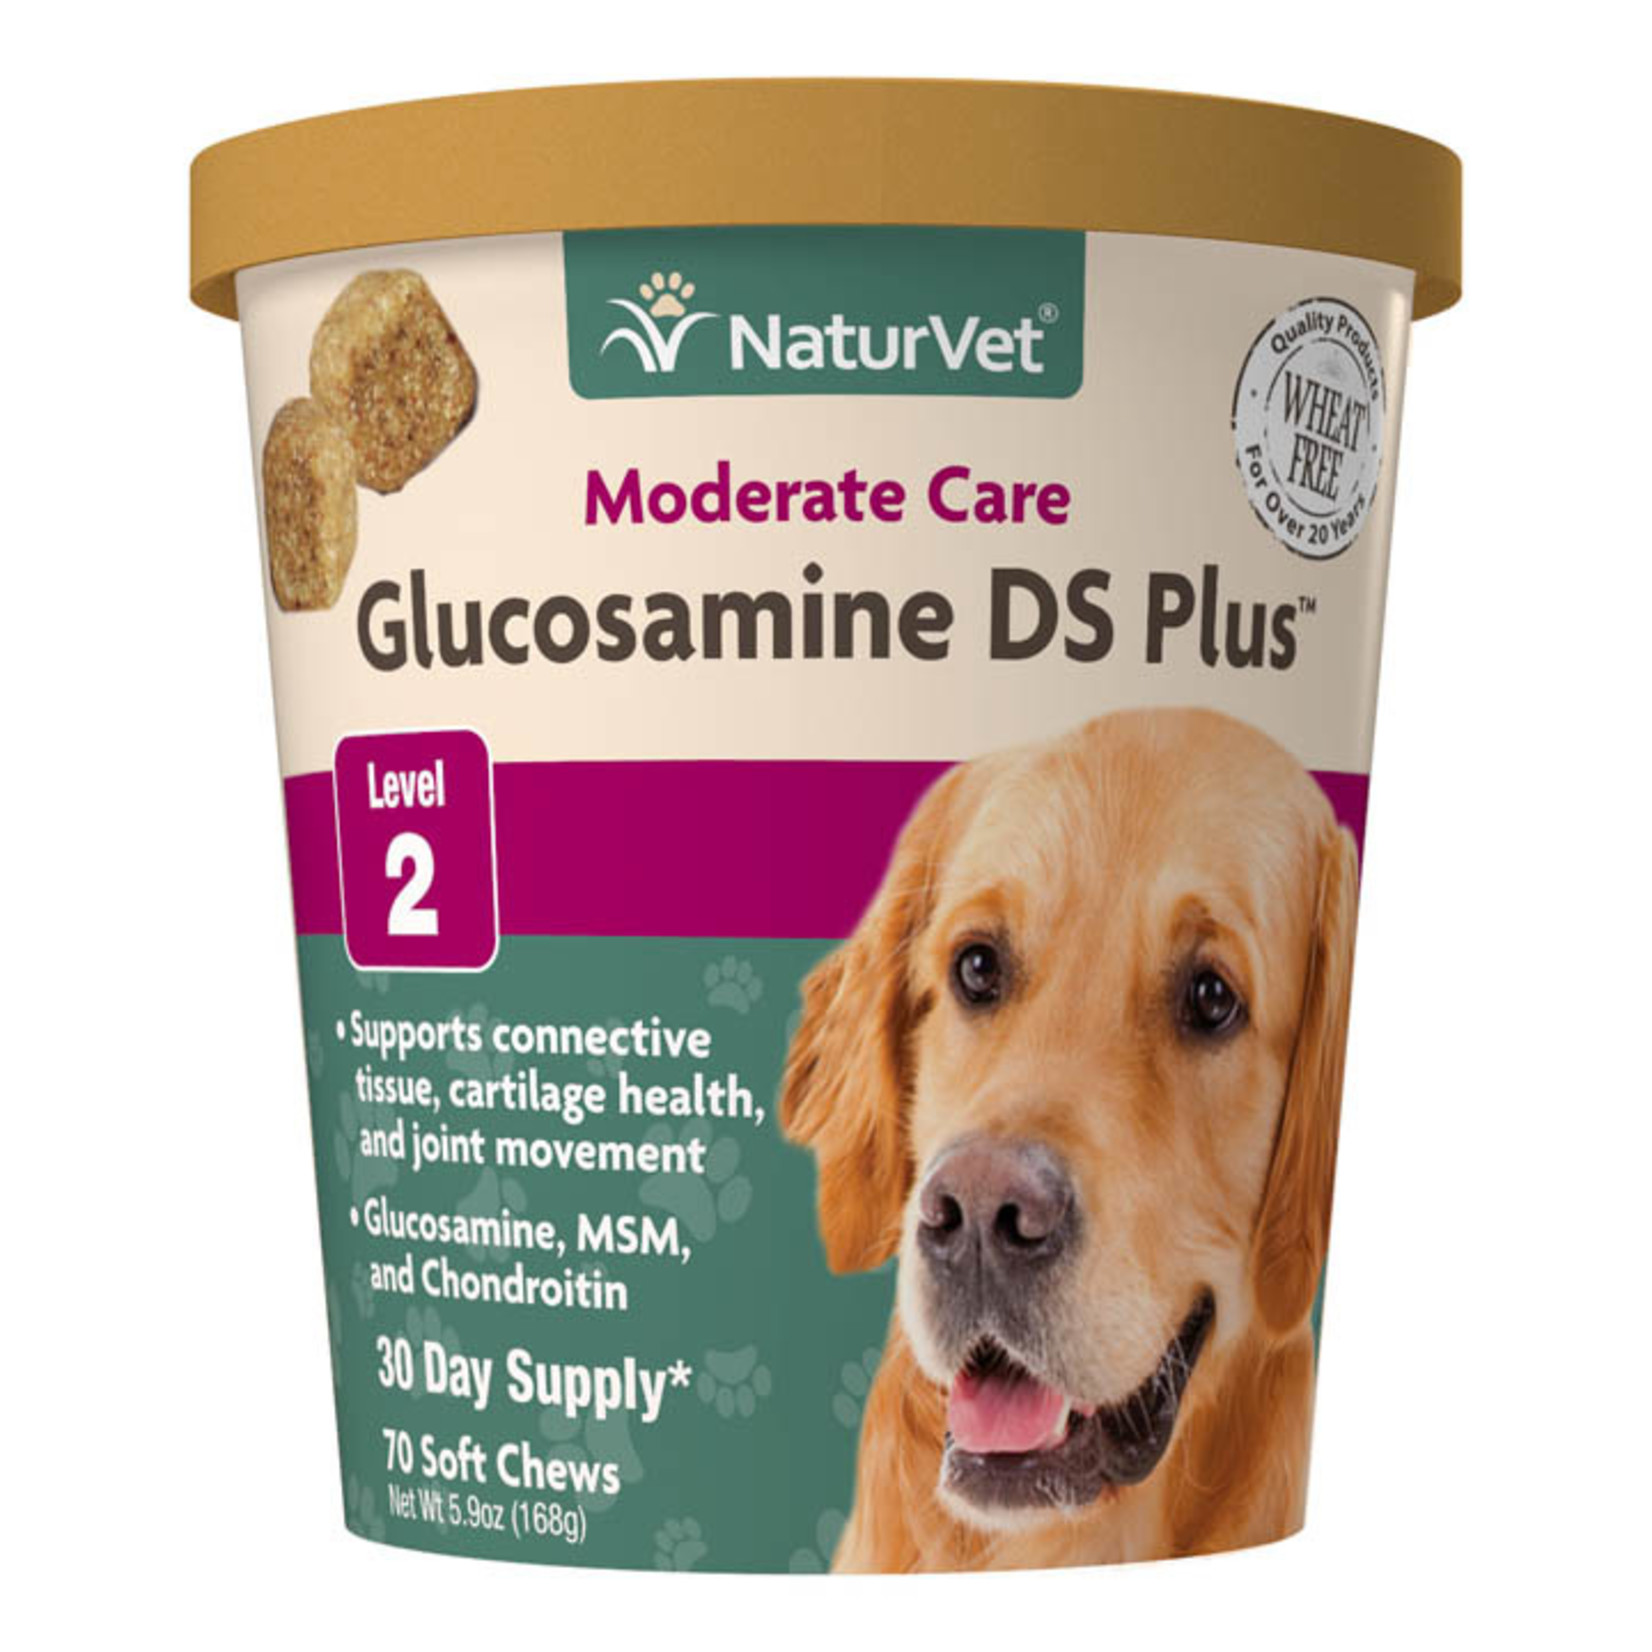 naturVet NaturVet Glucosamine DS Moderate Care Level 2 Joint Health Chew for Dogs and Cats 70ct